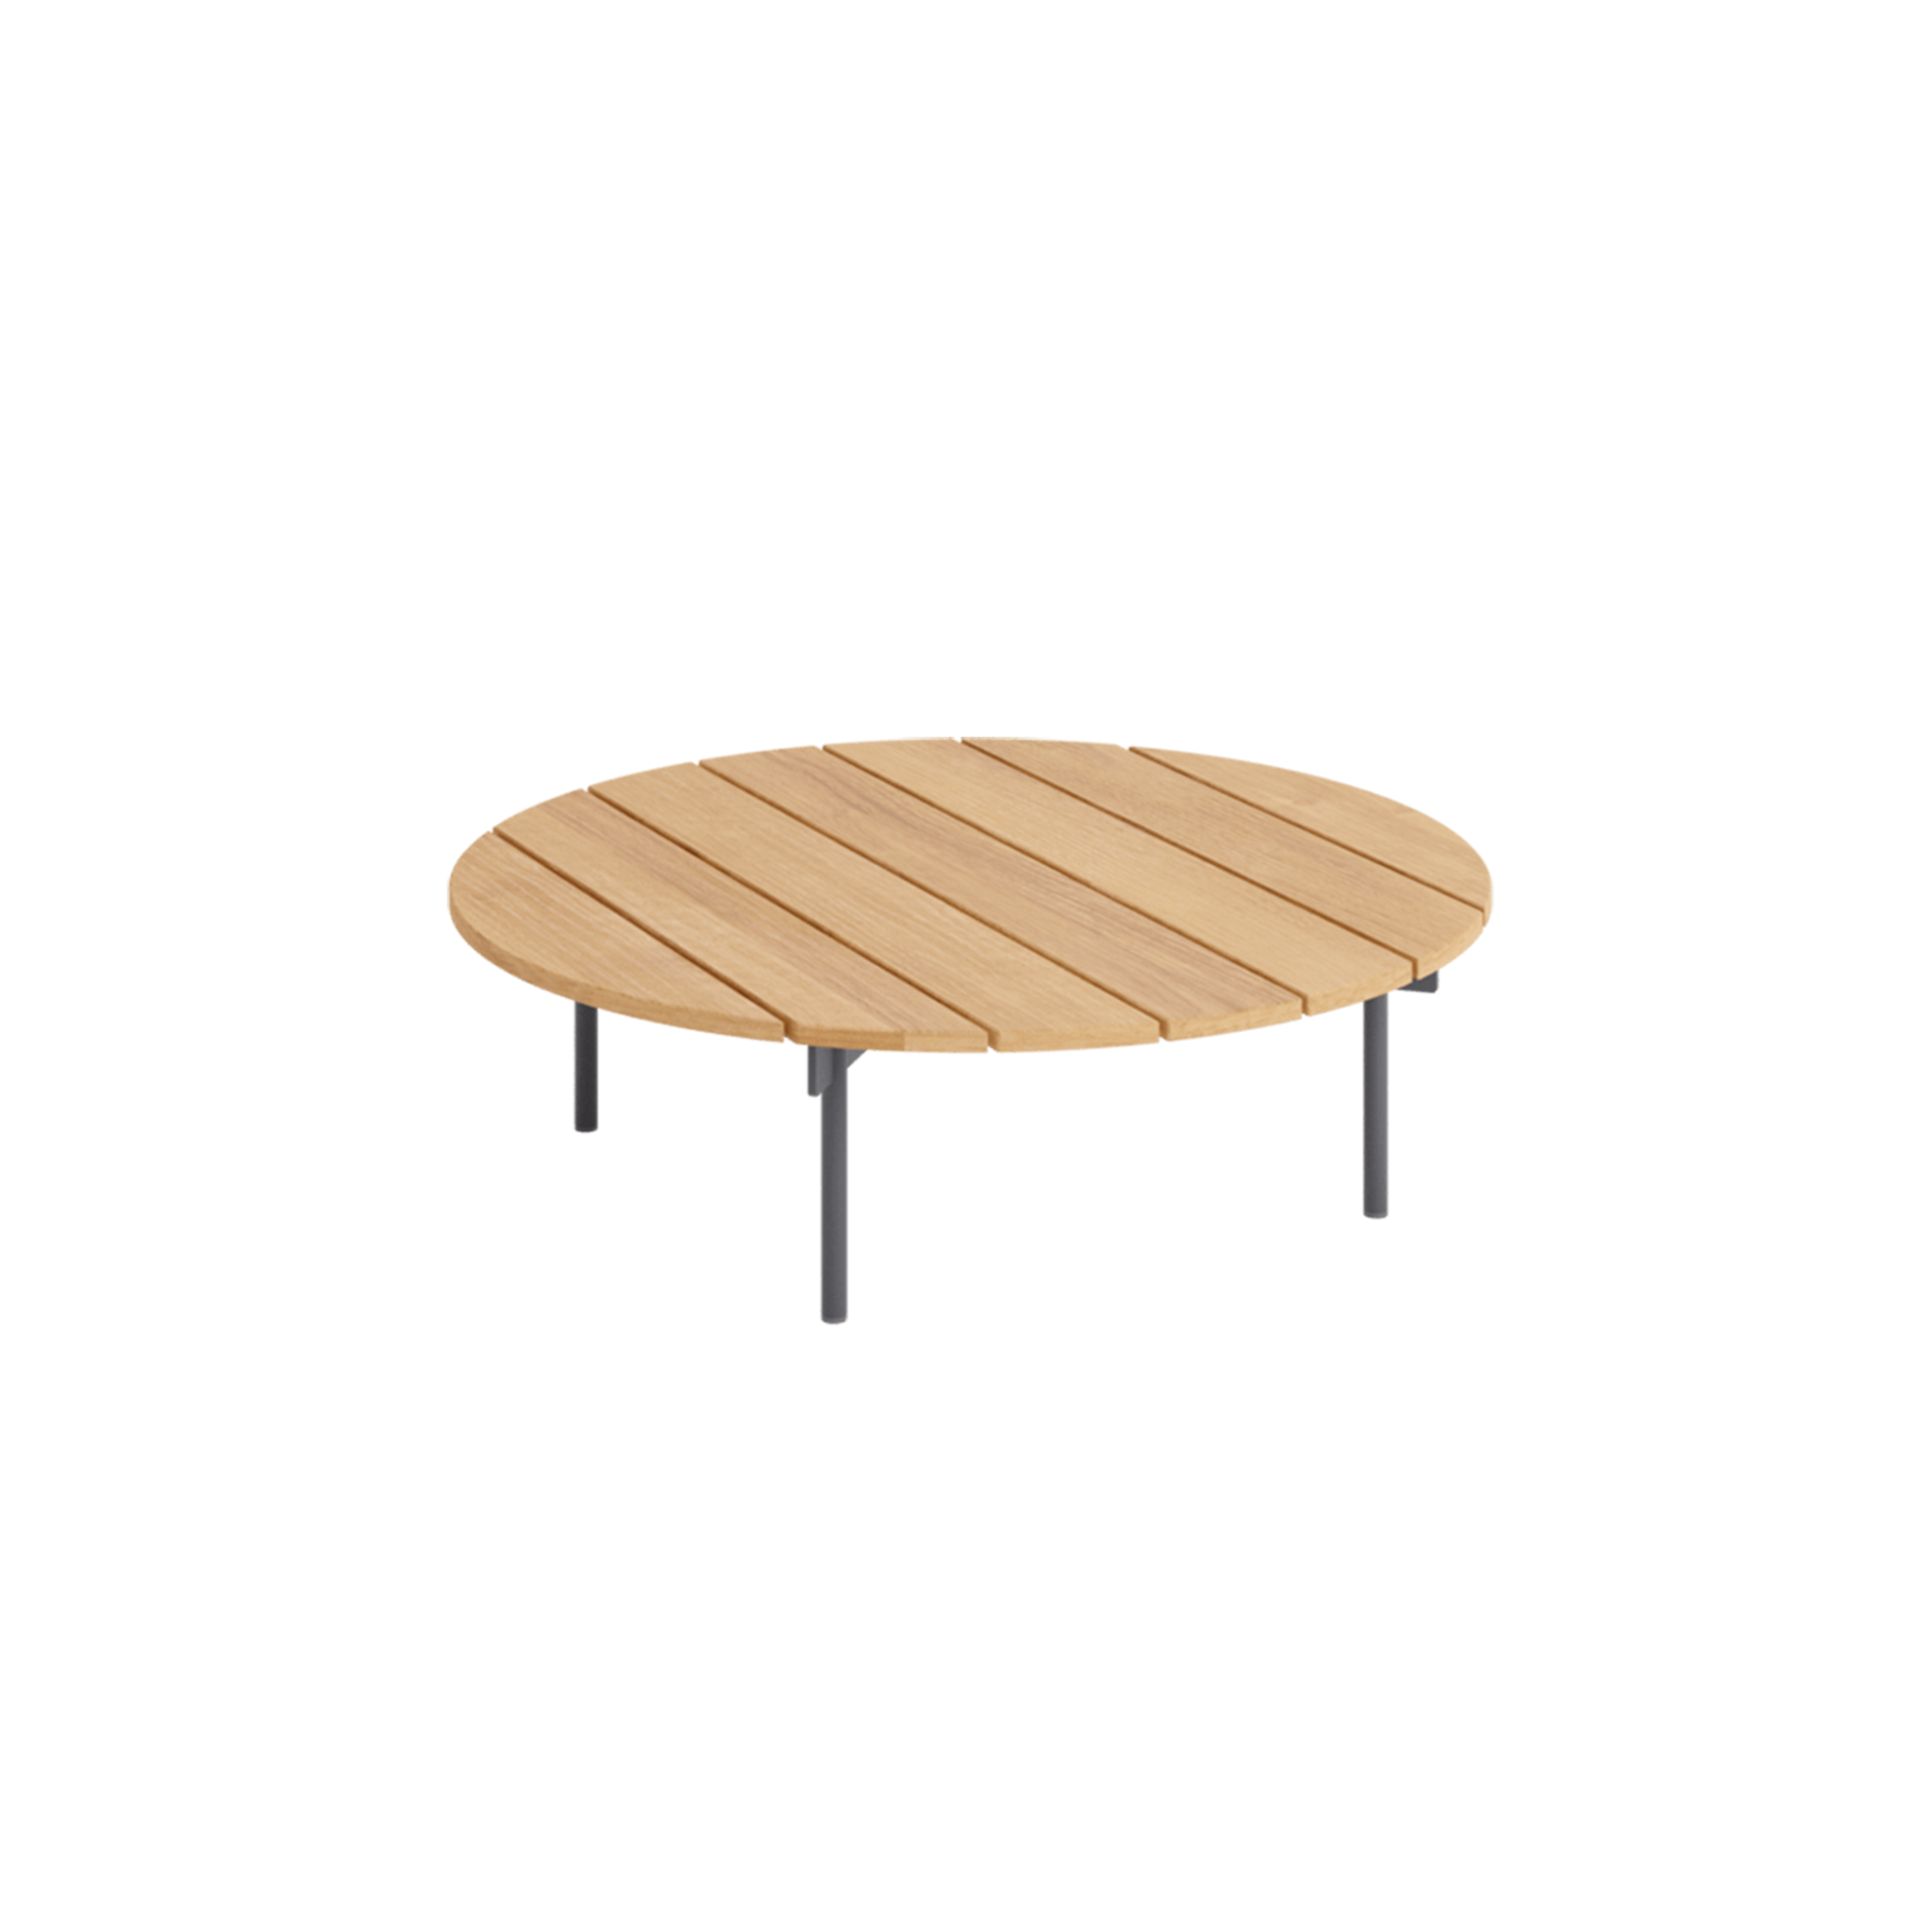 Designer Outdoor Coffee Tables Australia | Robert Plumb Throughout Outdoor Half Round Coffee Tables (Gallery 14 of 20)